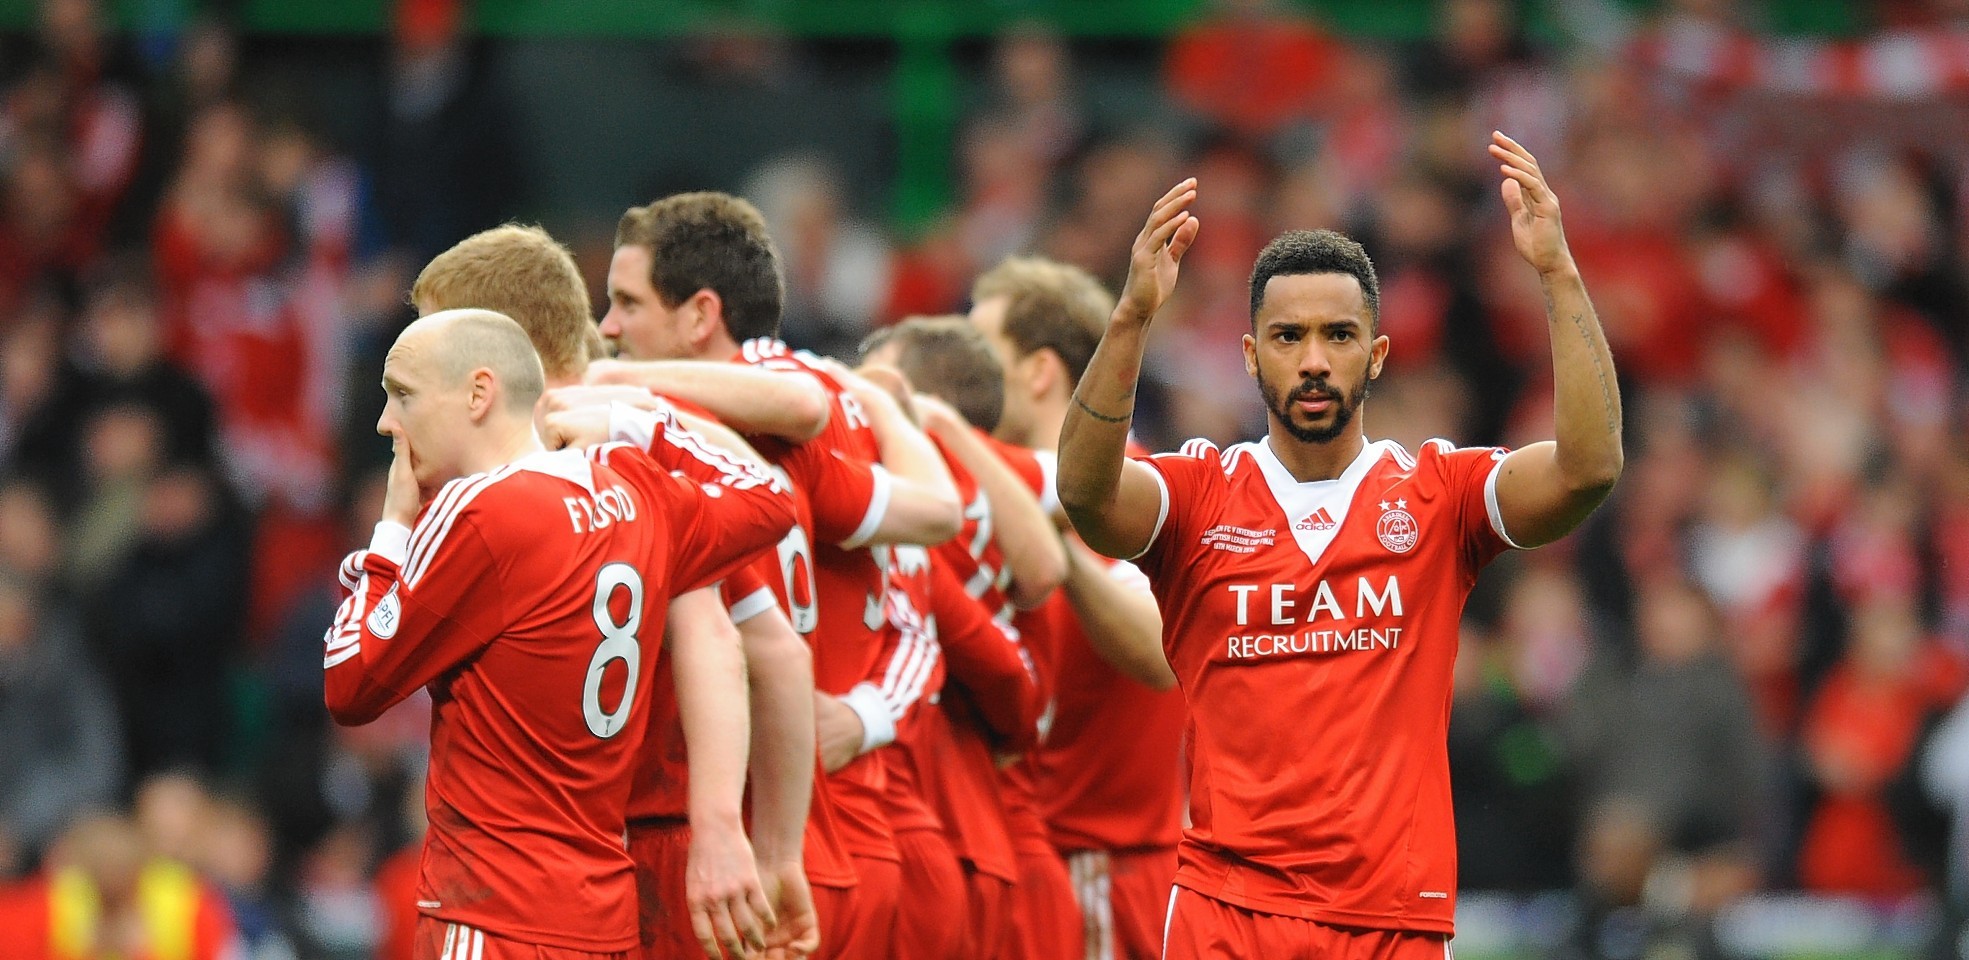 Logan turns to the fans as Aberdeen take cup final penalties